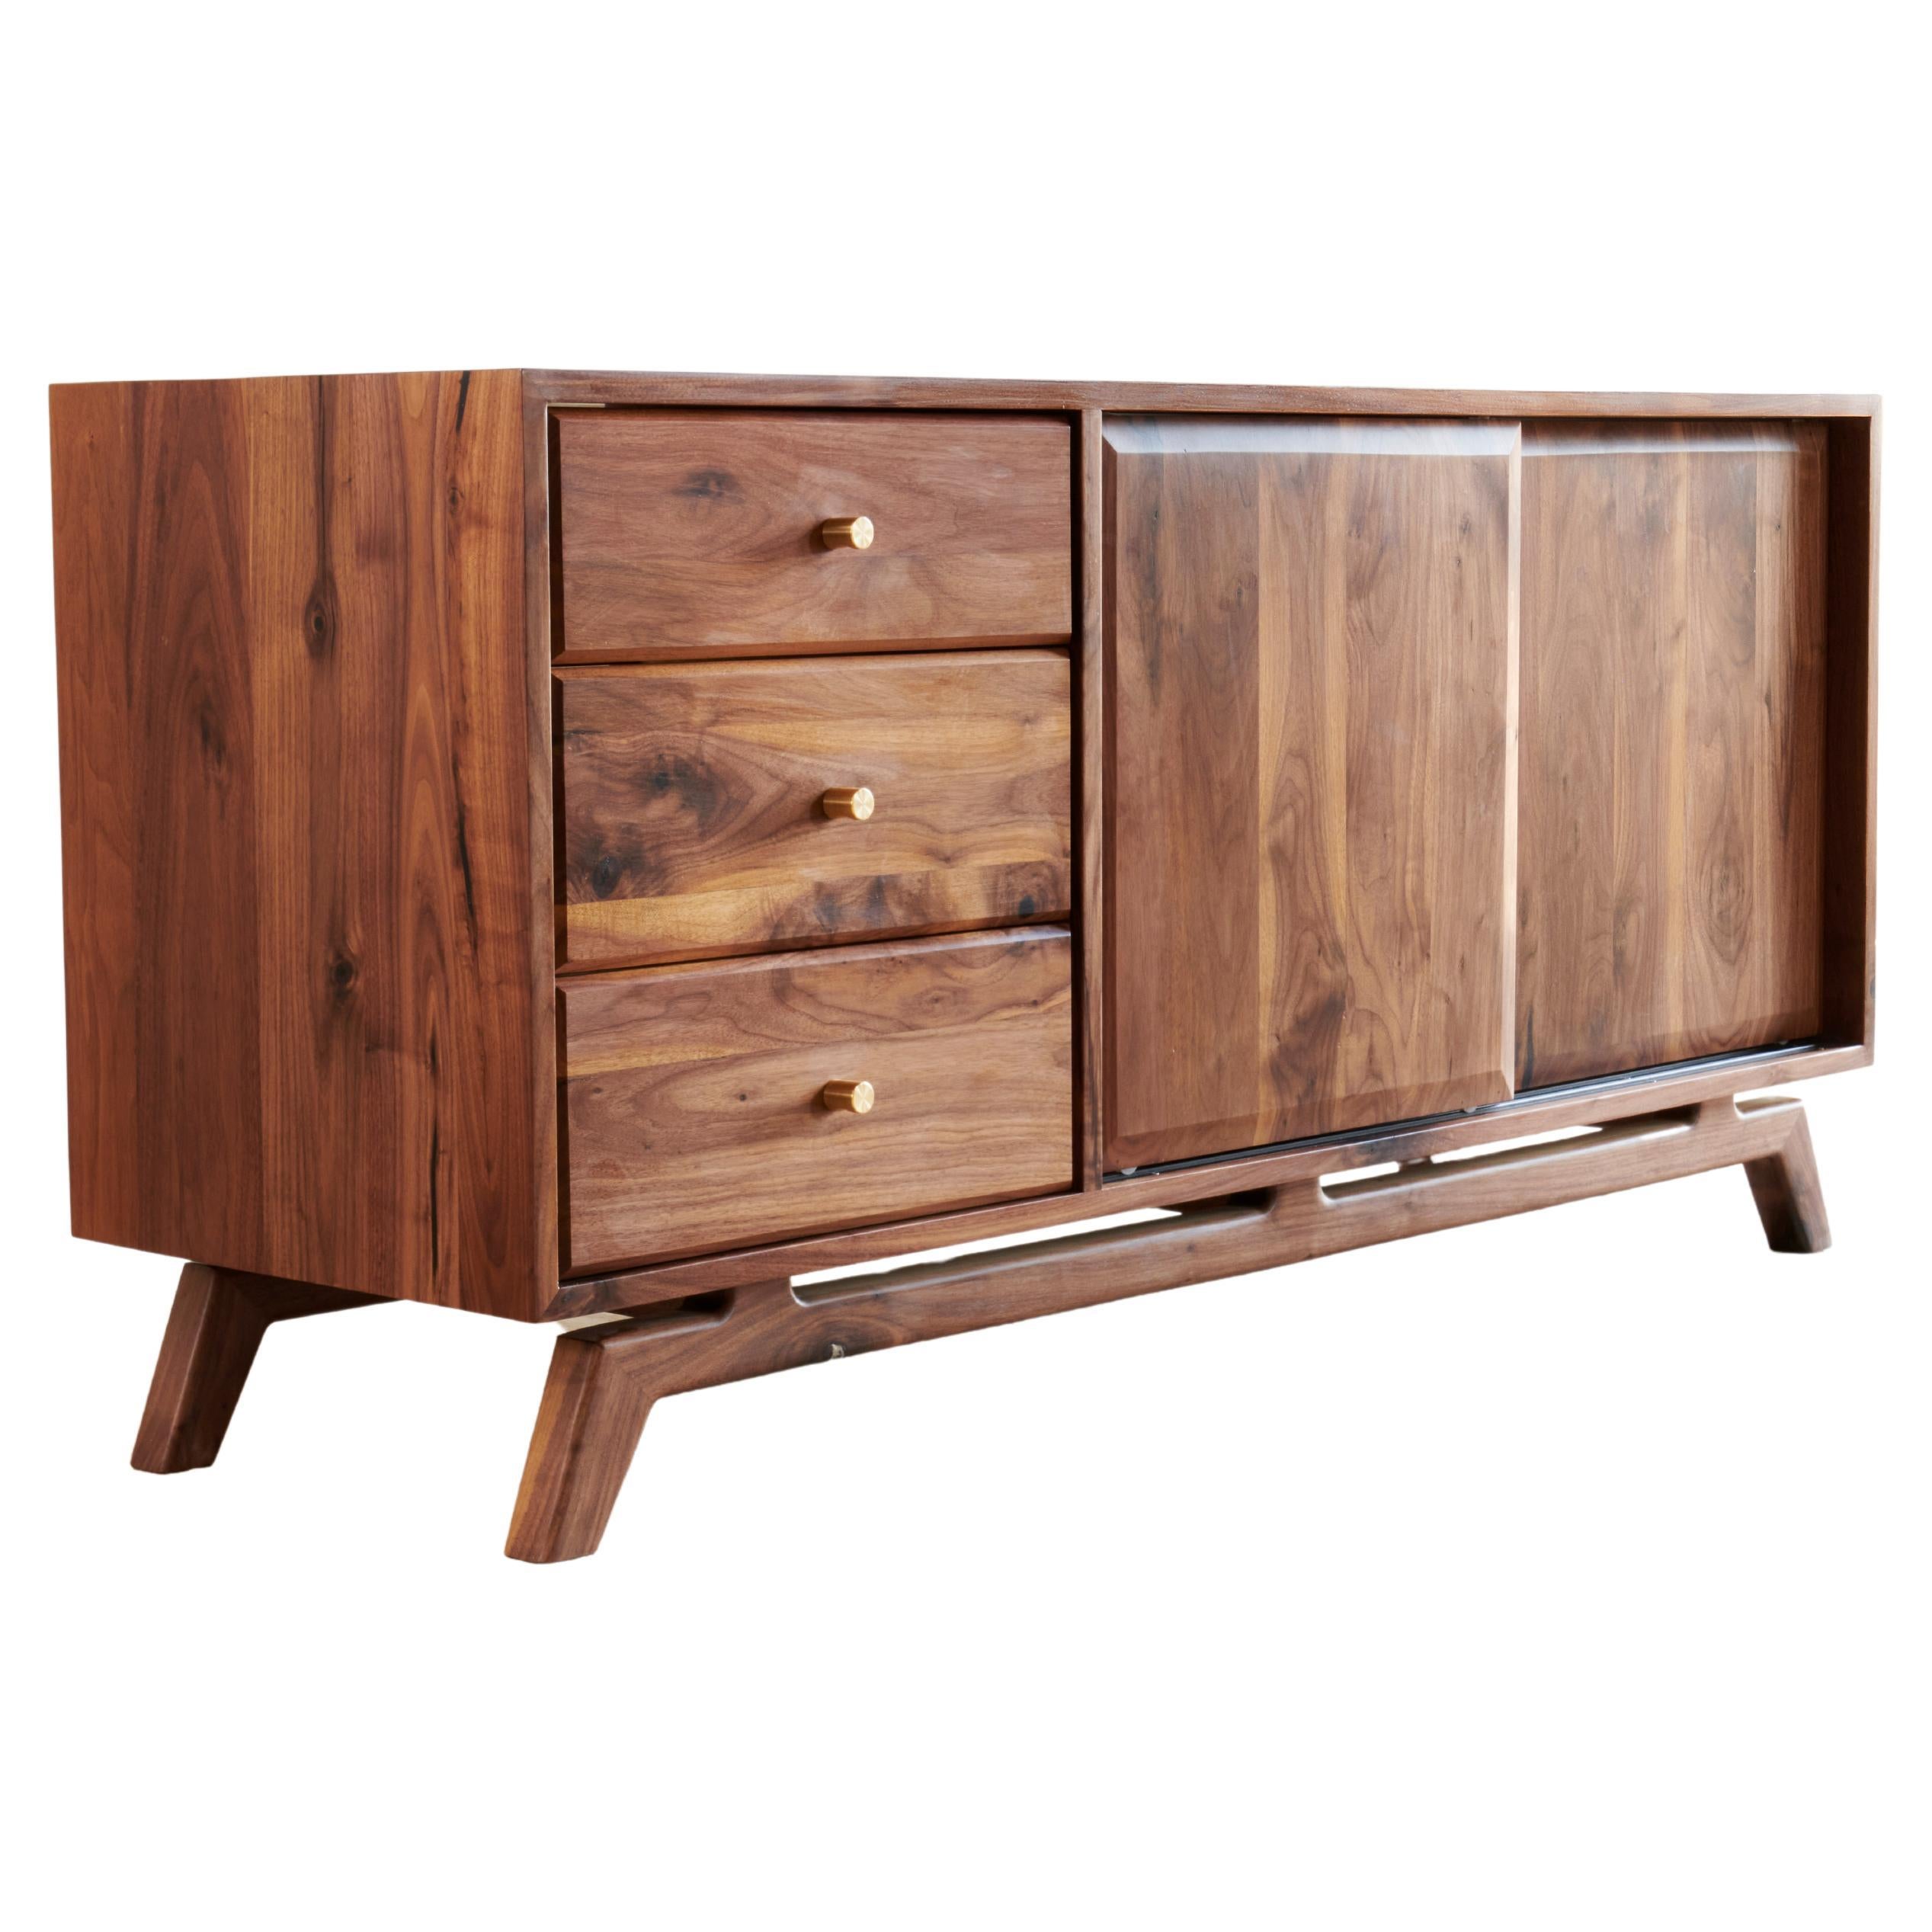 The Chap - A Mid Century Modern Media/TV Unit  For Sale